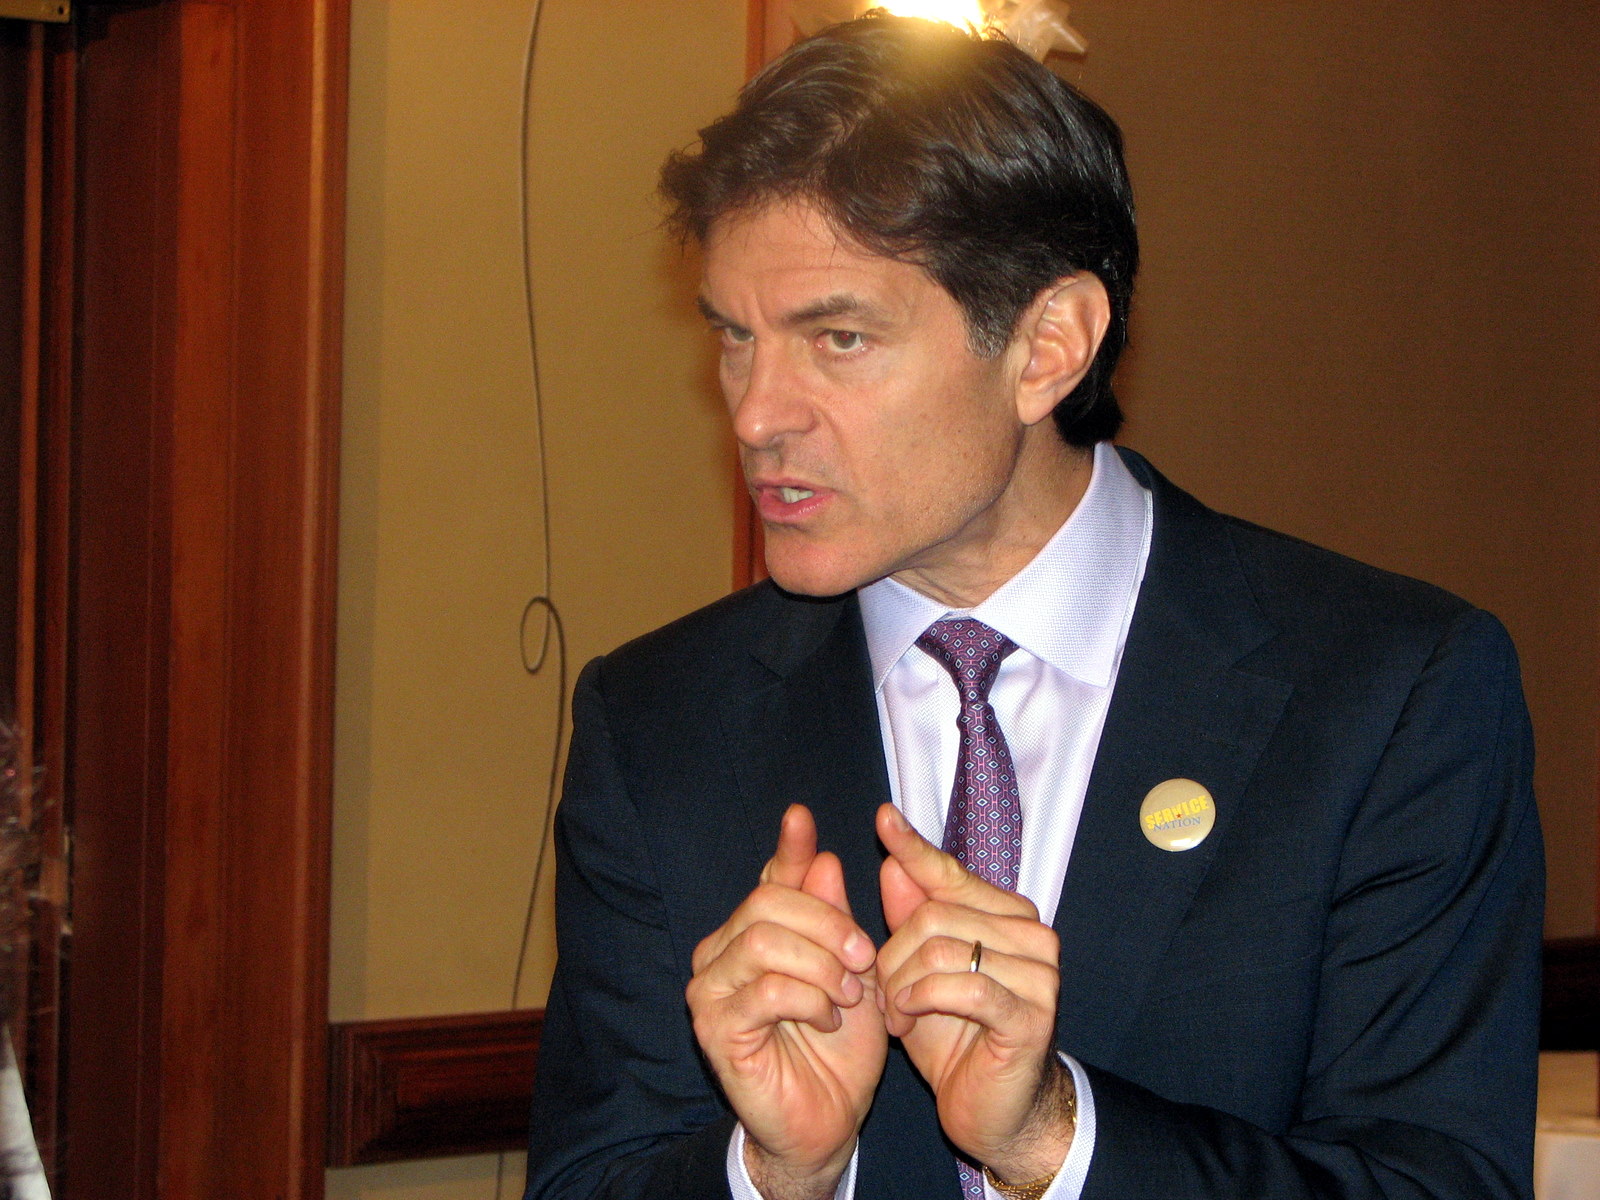 Image: Celebrity candidate Dr. Oz attacked pro-life laws, supported abortion rights in 2019